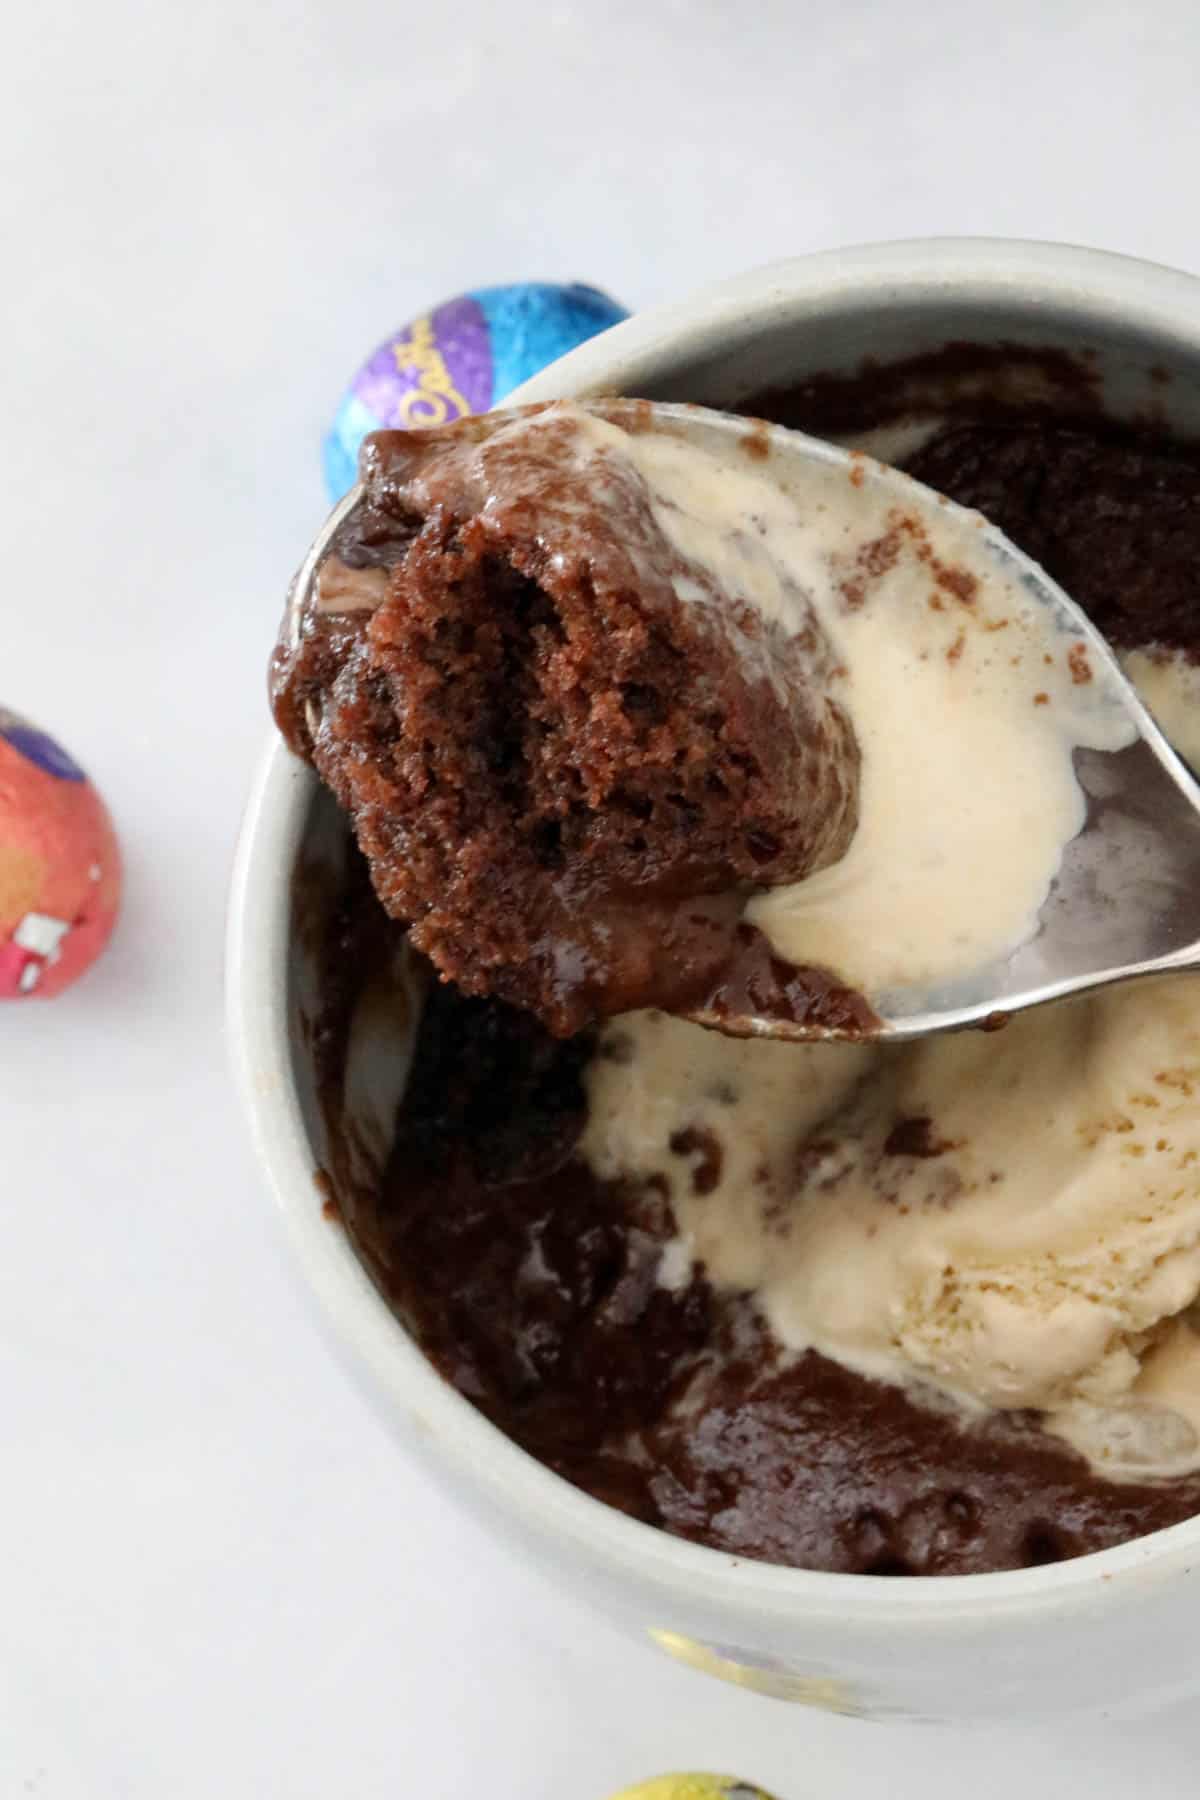 A spoon holding up a portion of the chocolate cake with some ice cream.